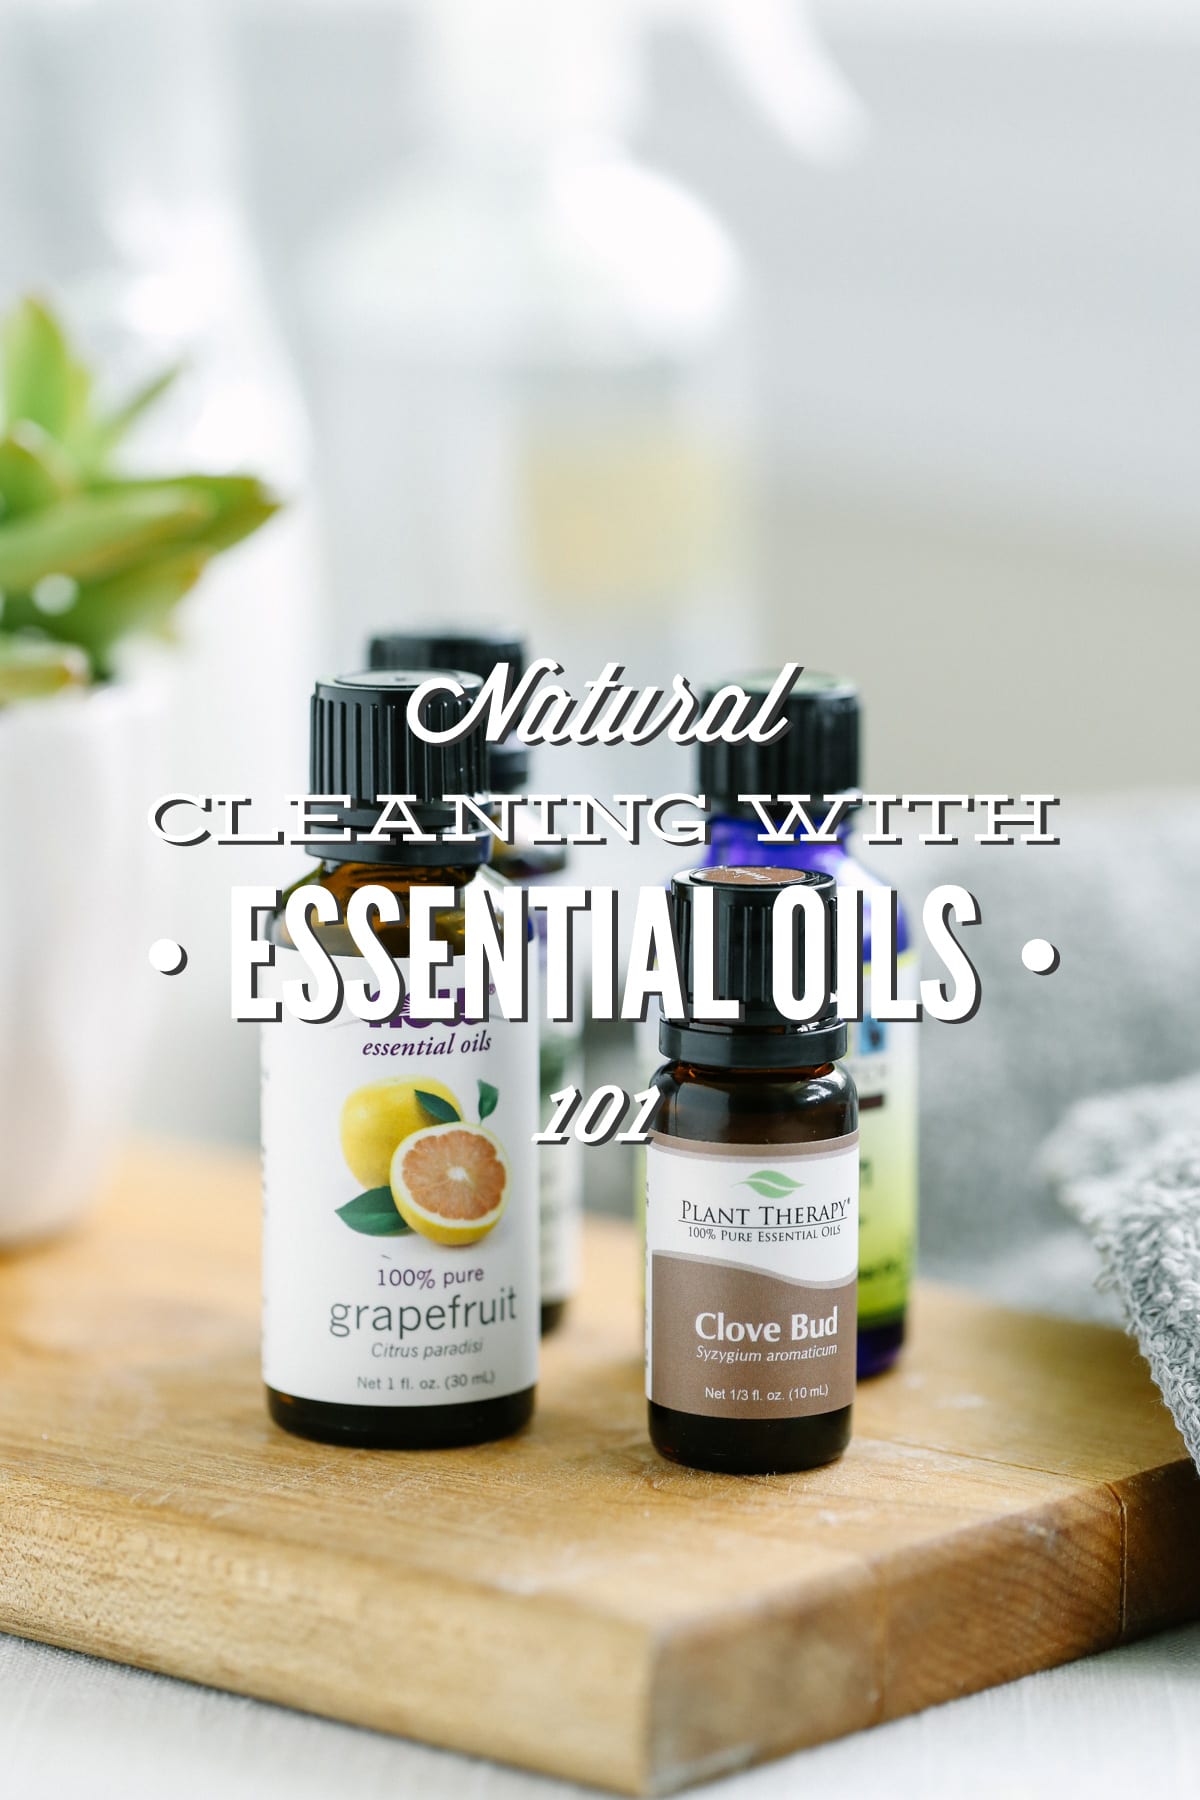 Naturally Cleaning with Essential Oils